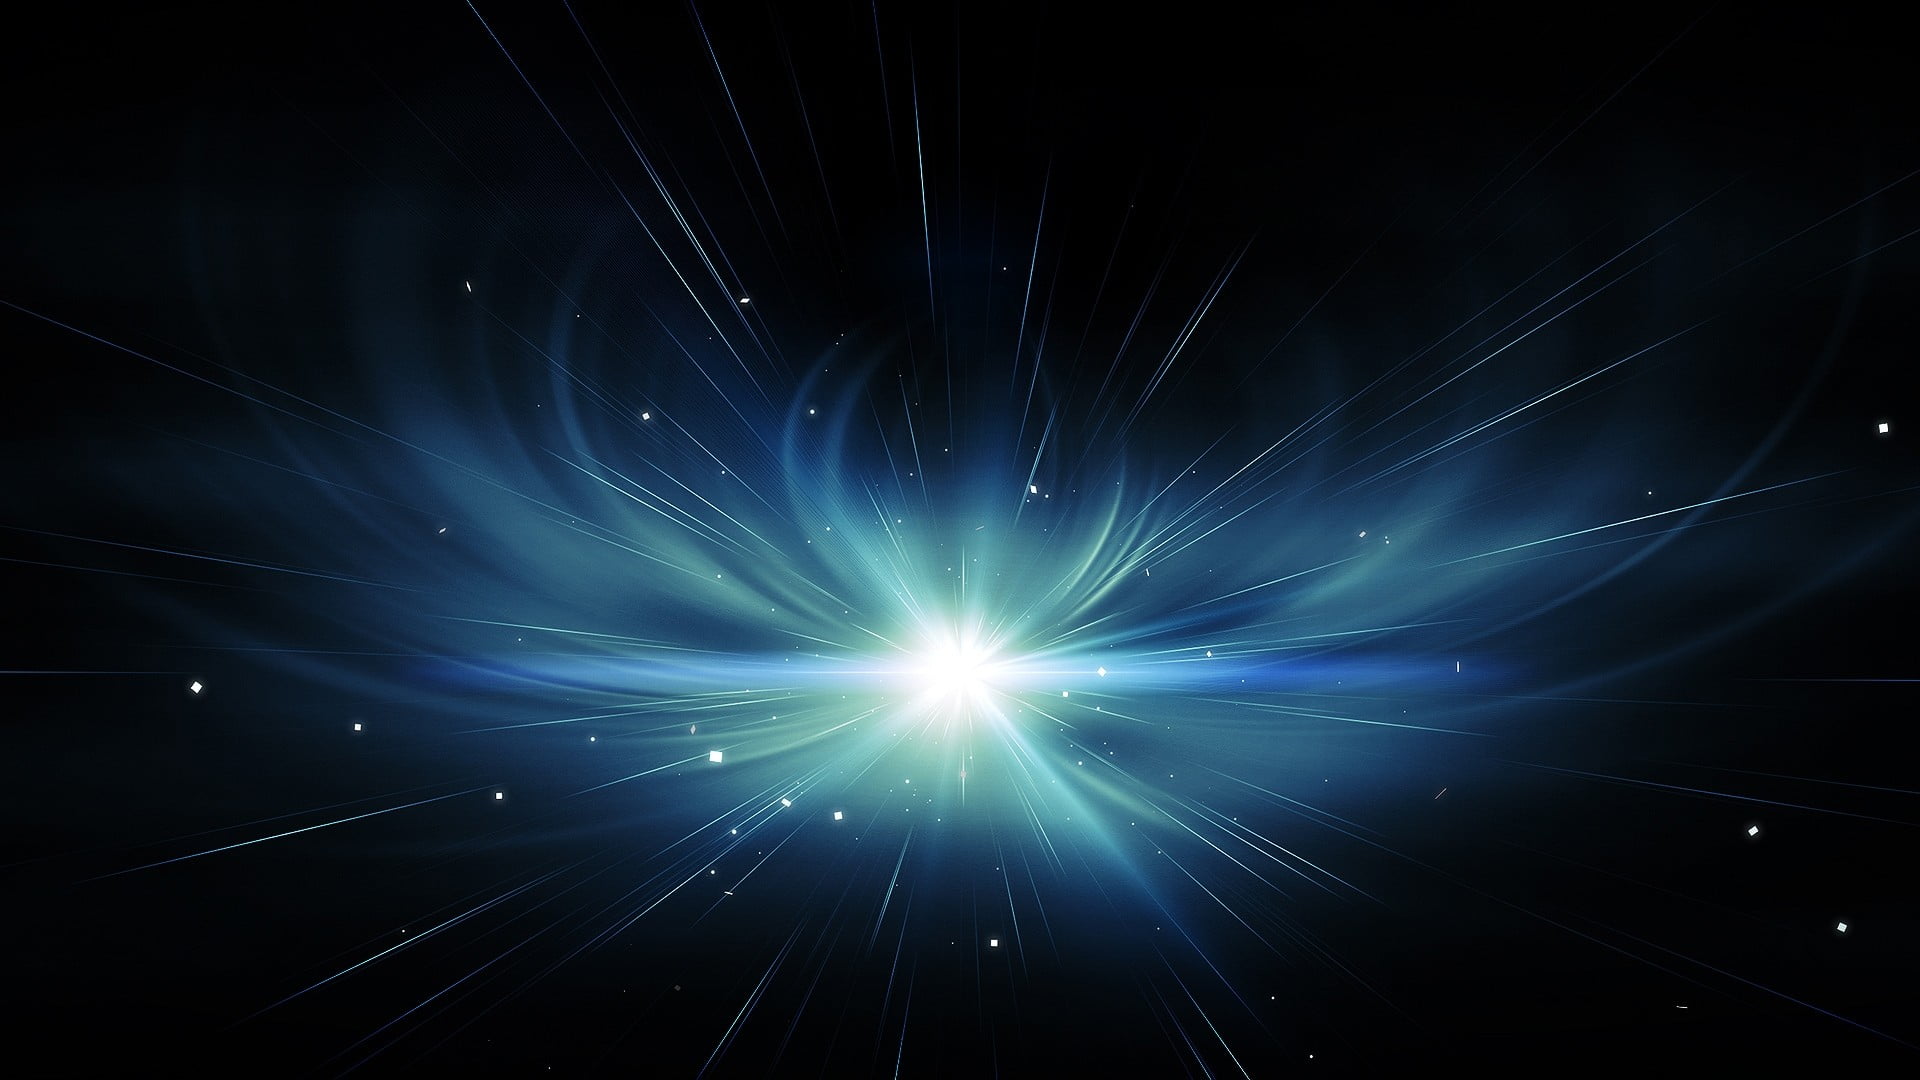 black, green, and blue galaxy illustration, space, stars, black background